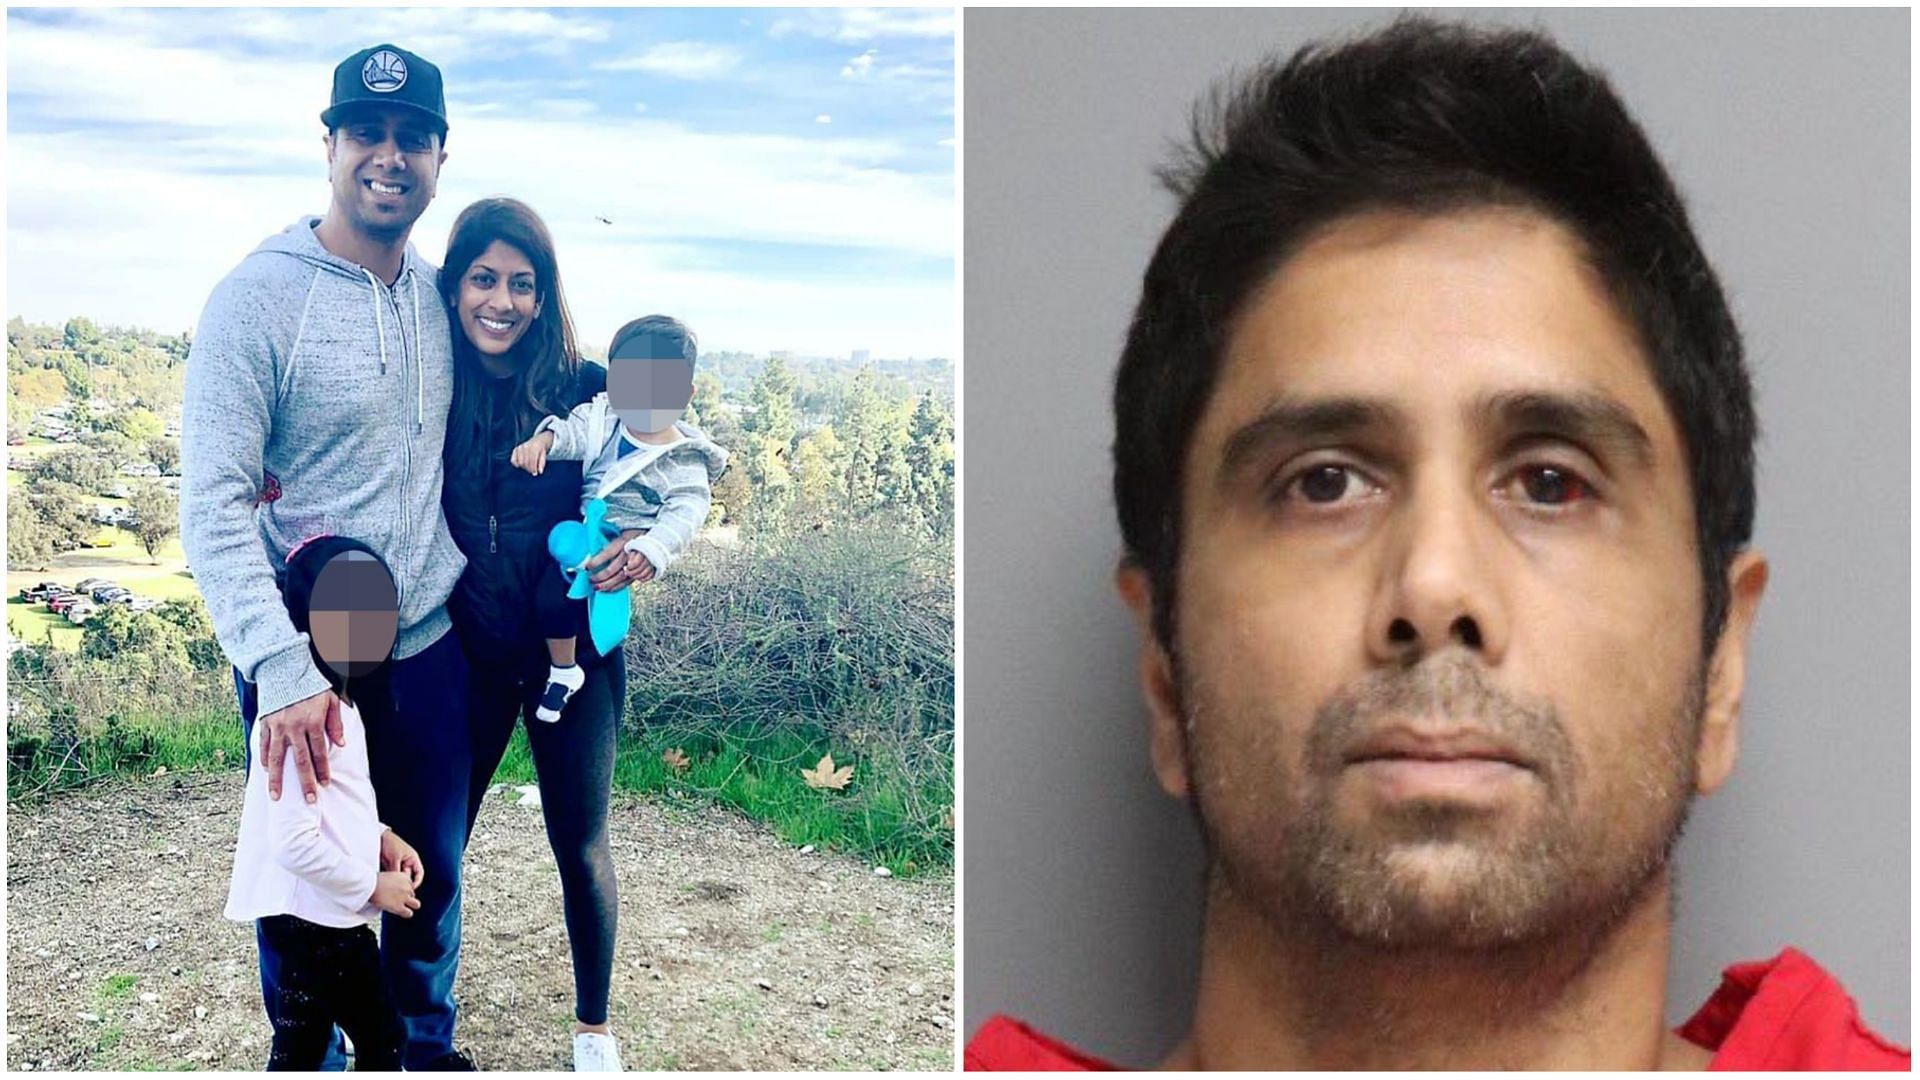 A 42-year-old California doctor was charged with three counts of attempted murder on Monday (Images via Twitter @/DotMcDonald @/henrykleeKTVU)